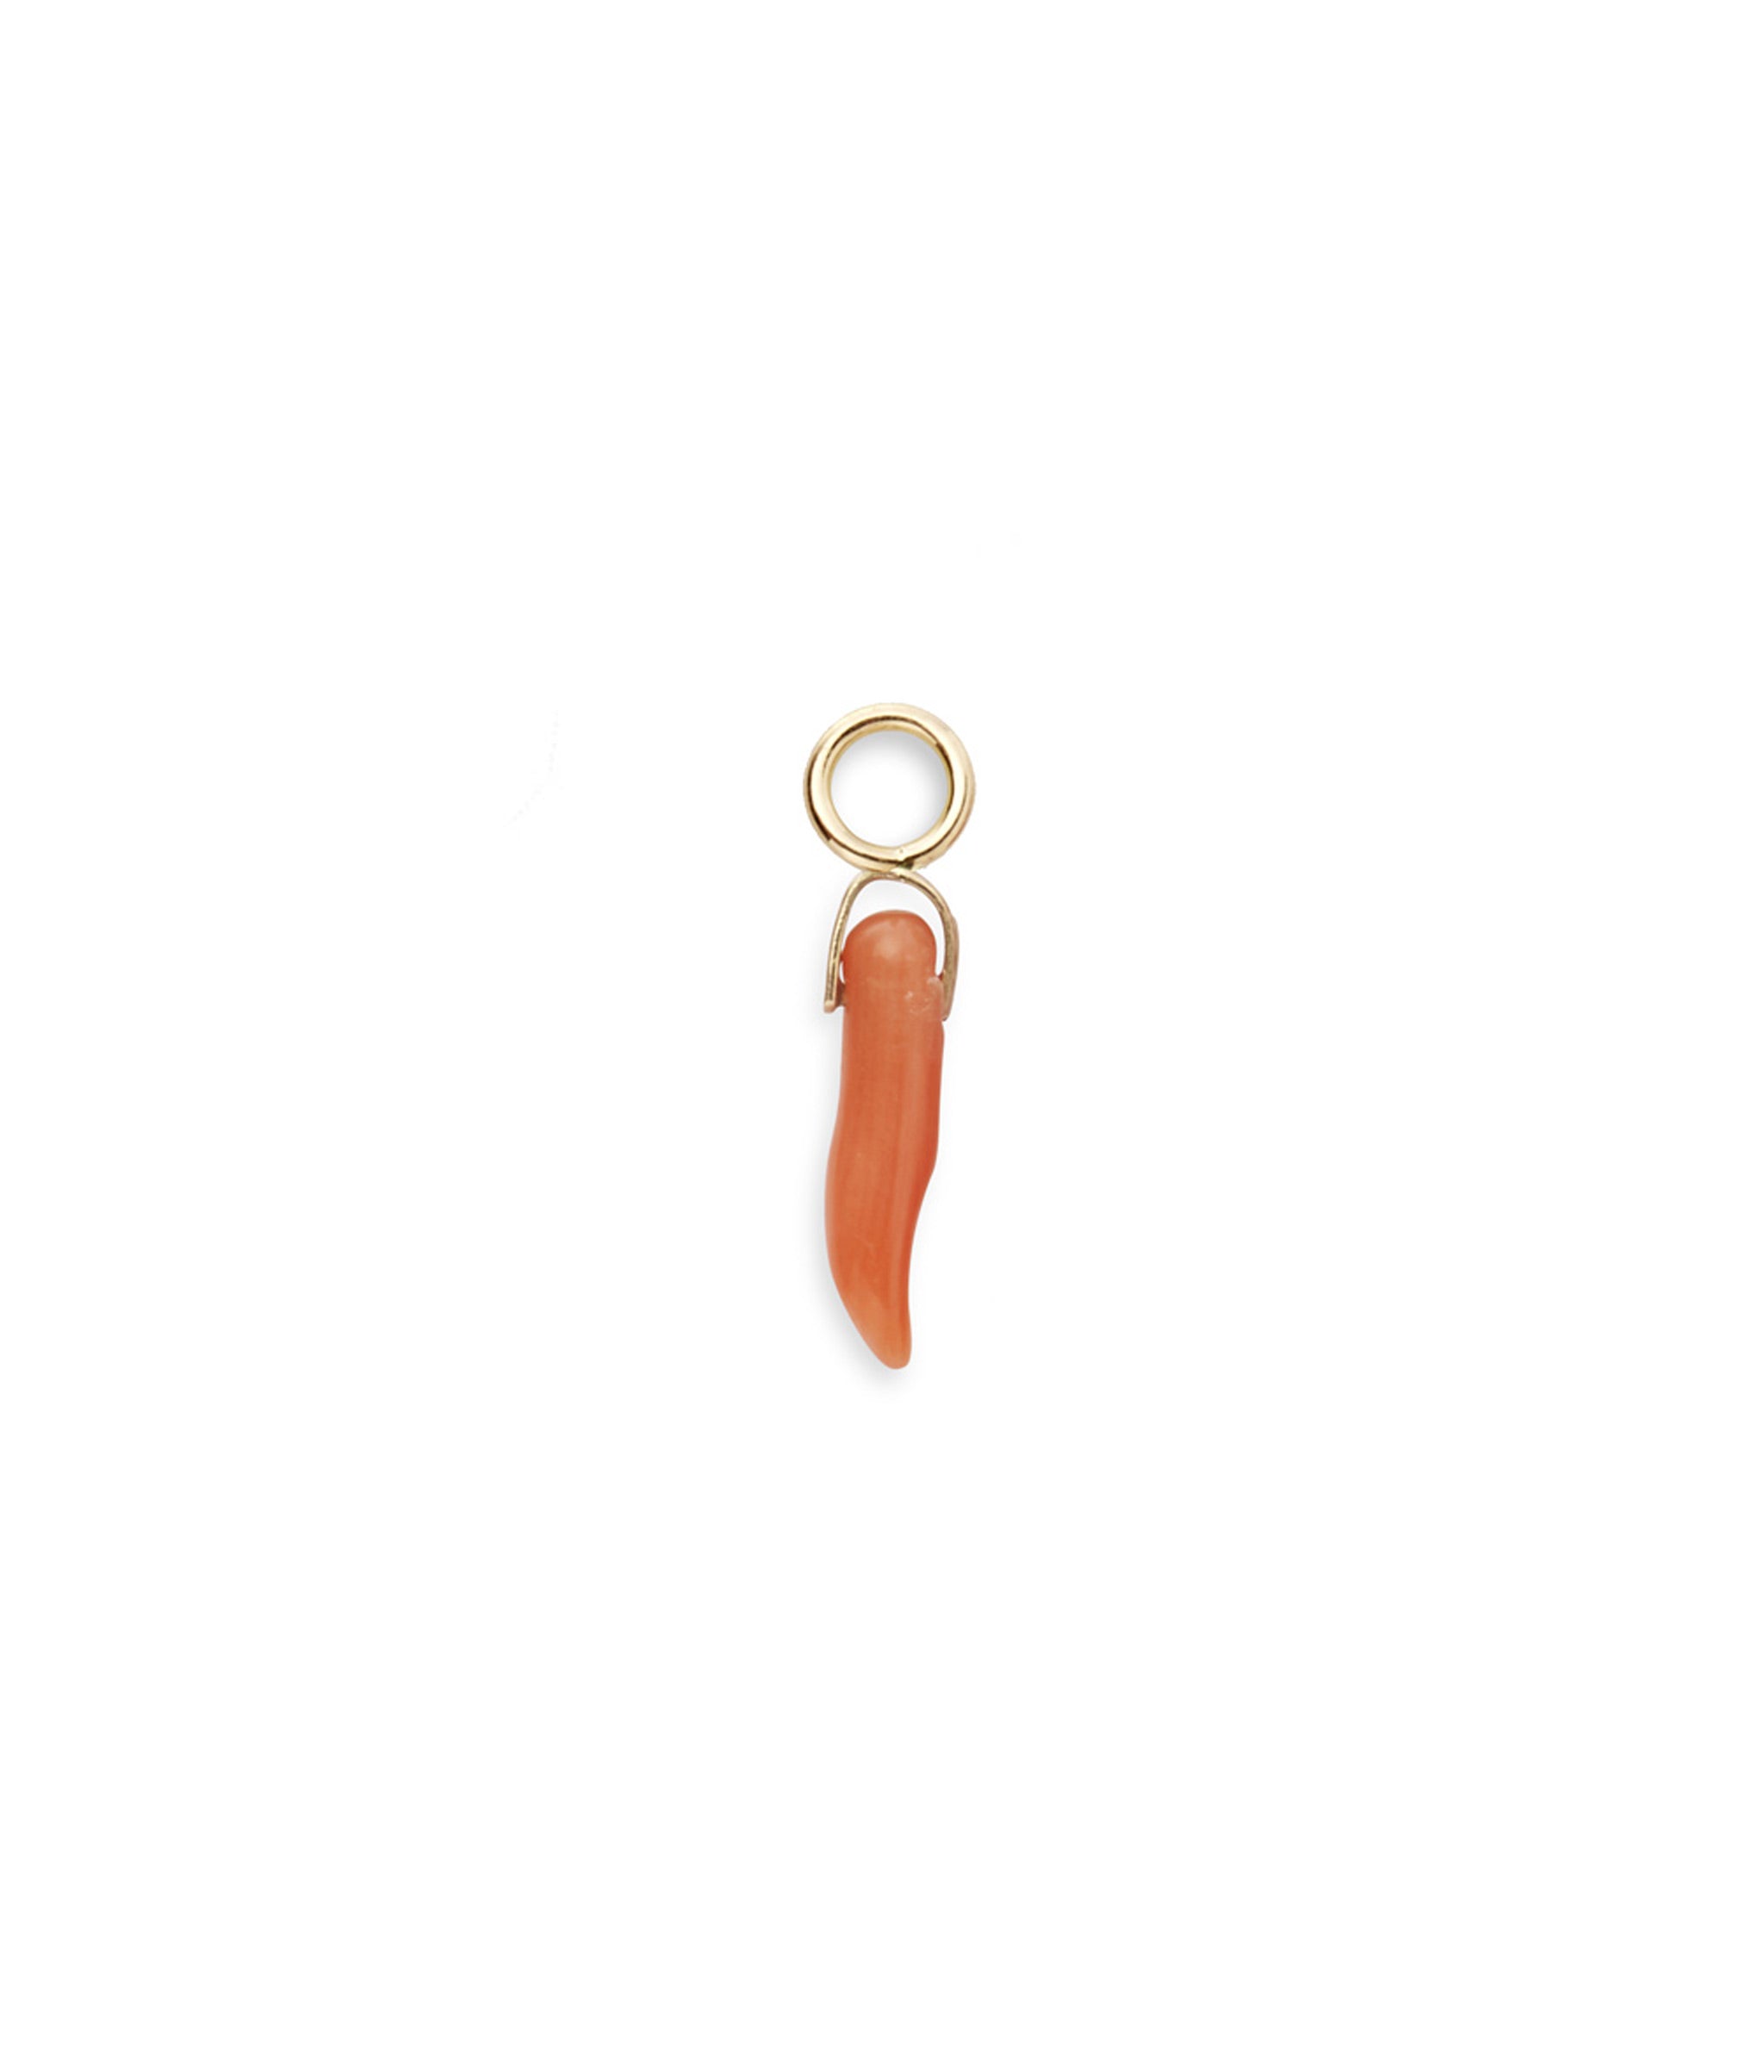 Coral Horn 14k Earring Charm. Light pink coral horn earring charm with 14k gold bale and ring.